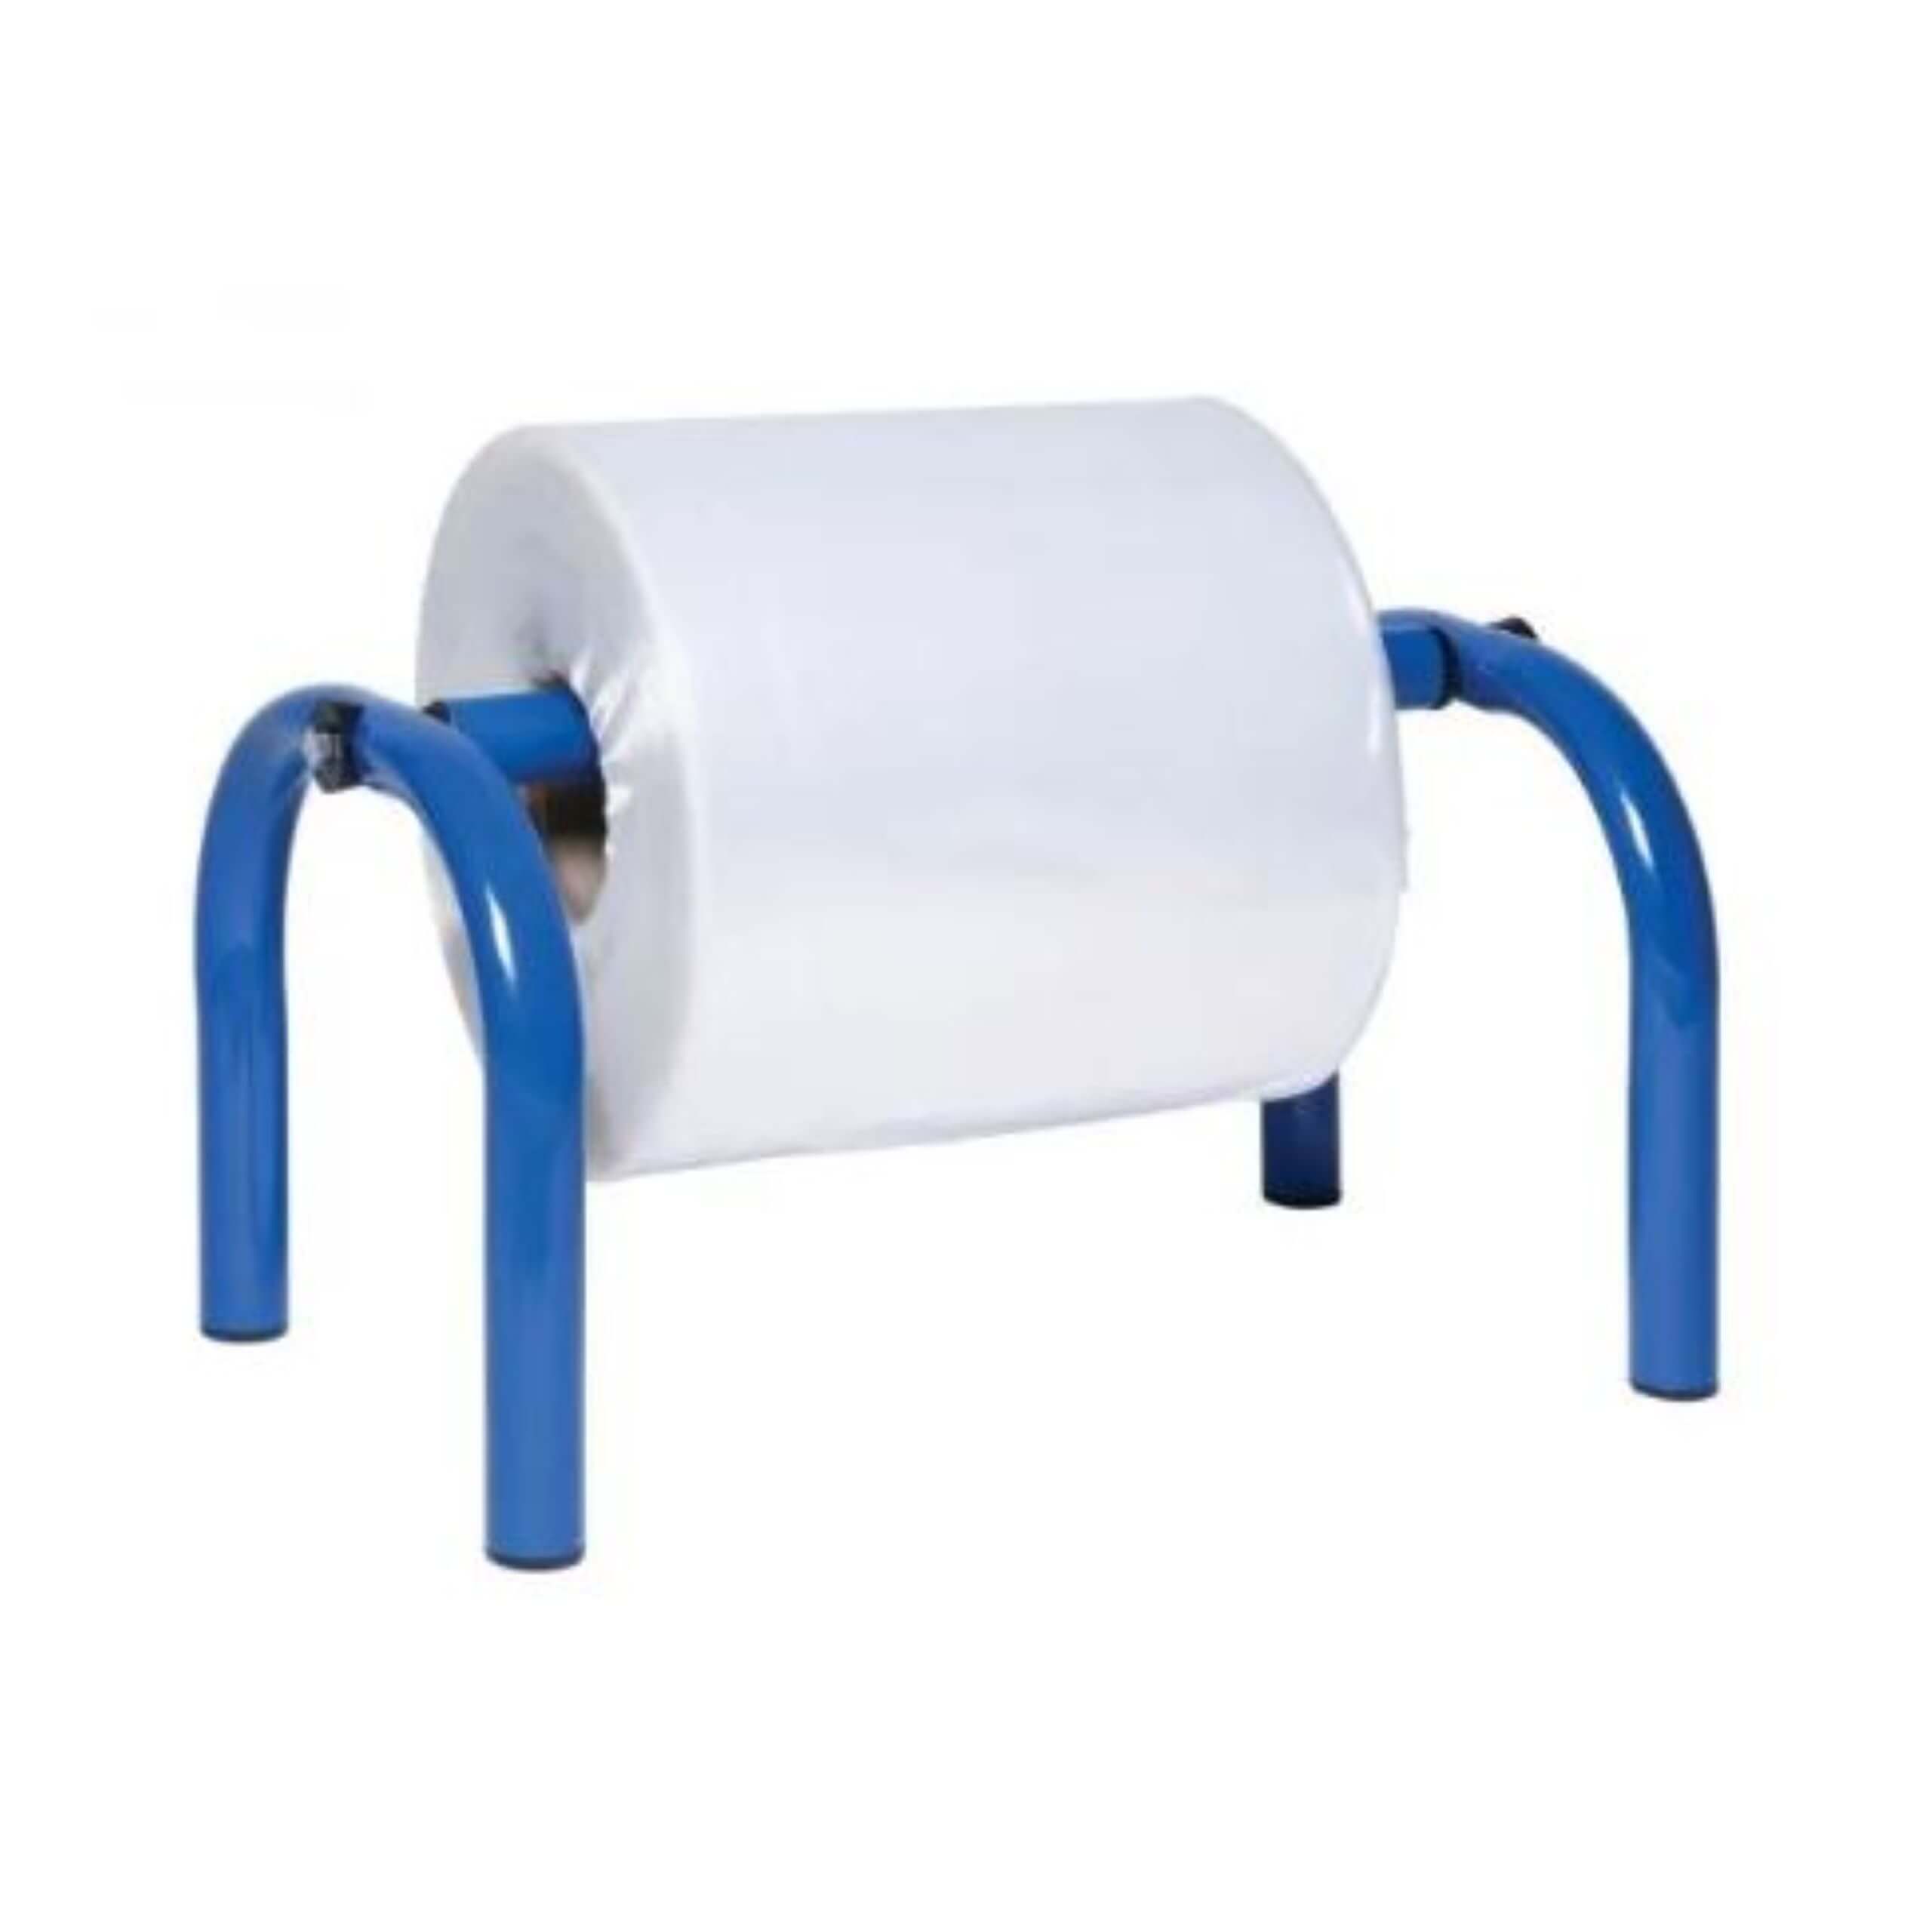 An image of our Polythene Roll Dispensers.